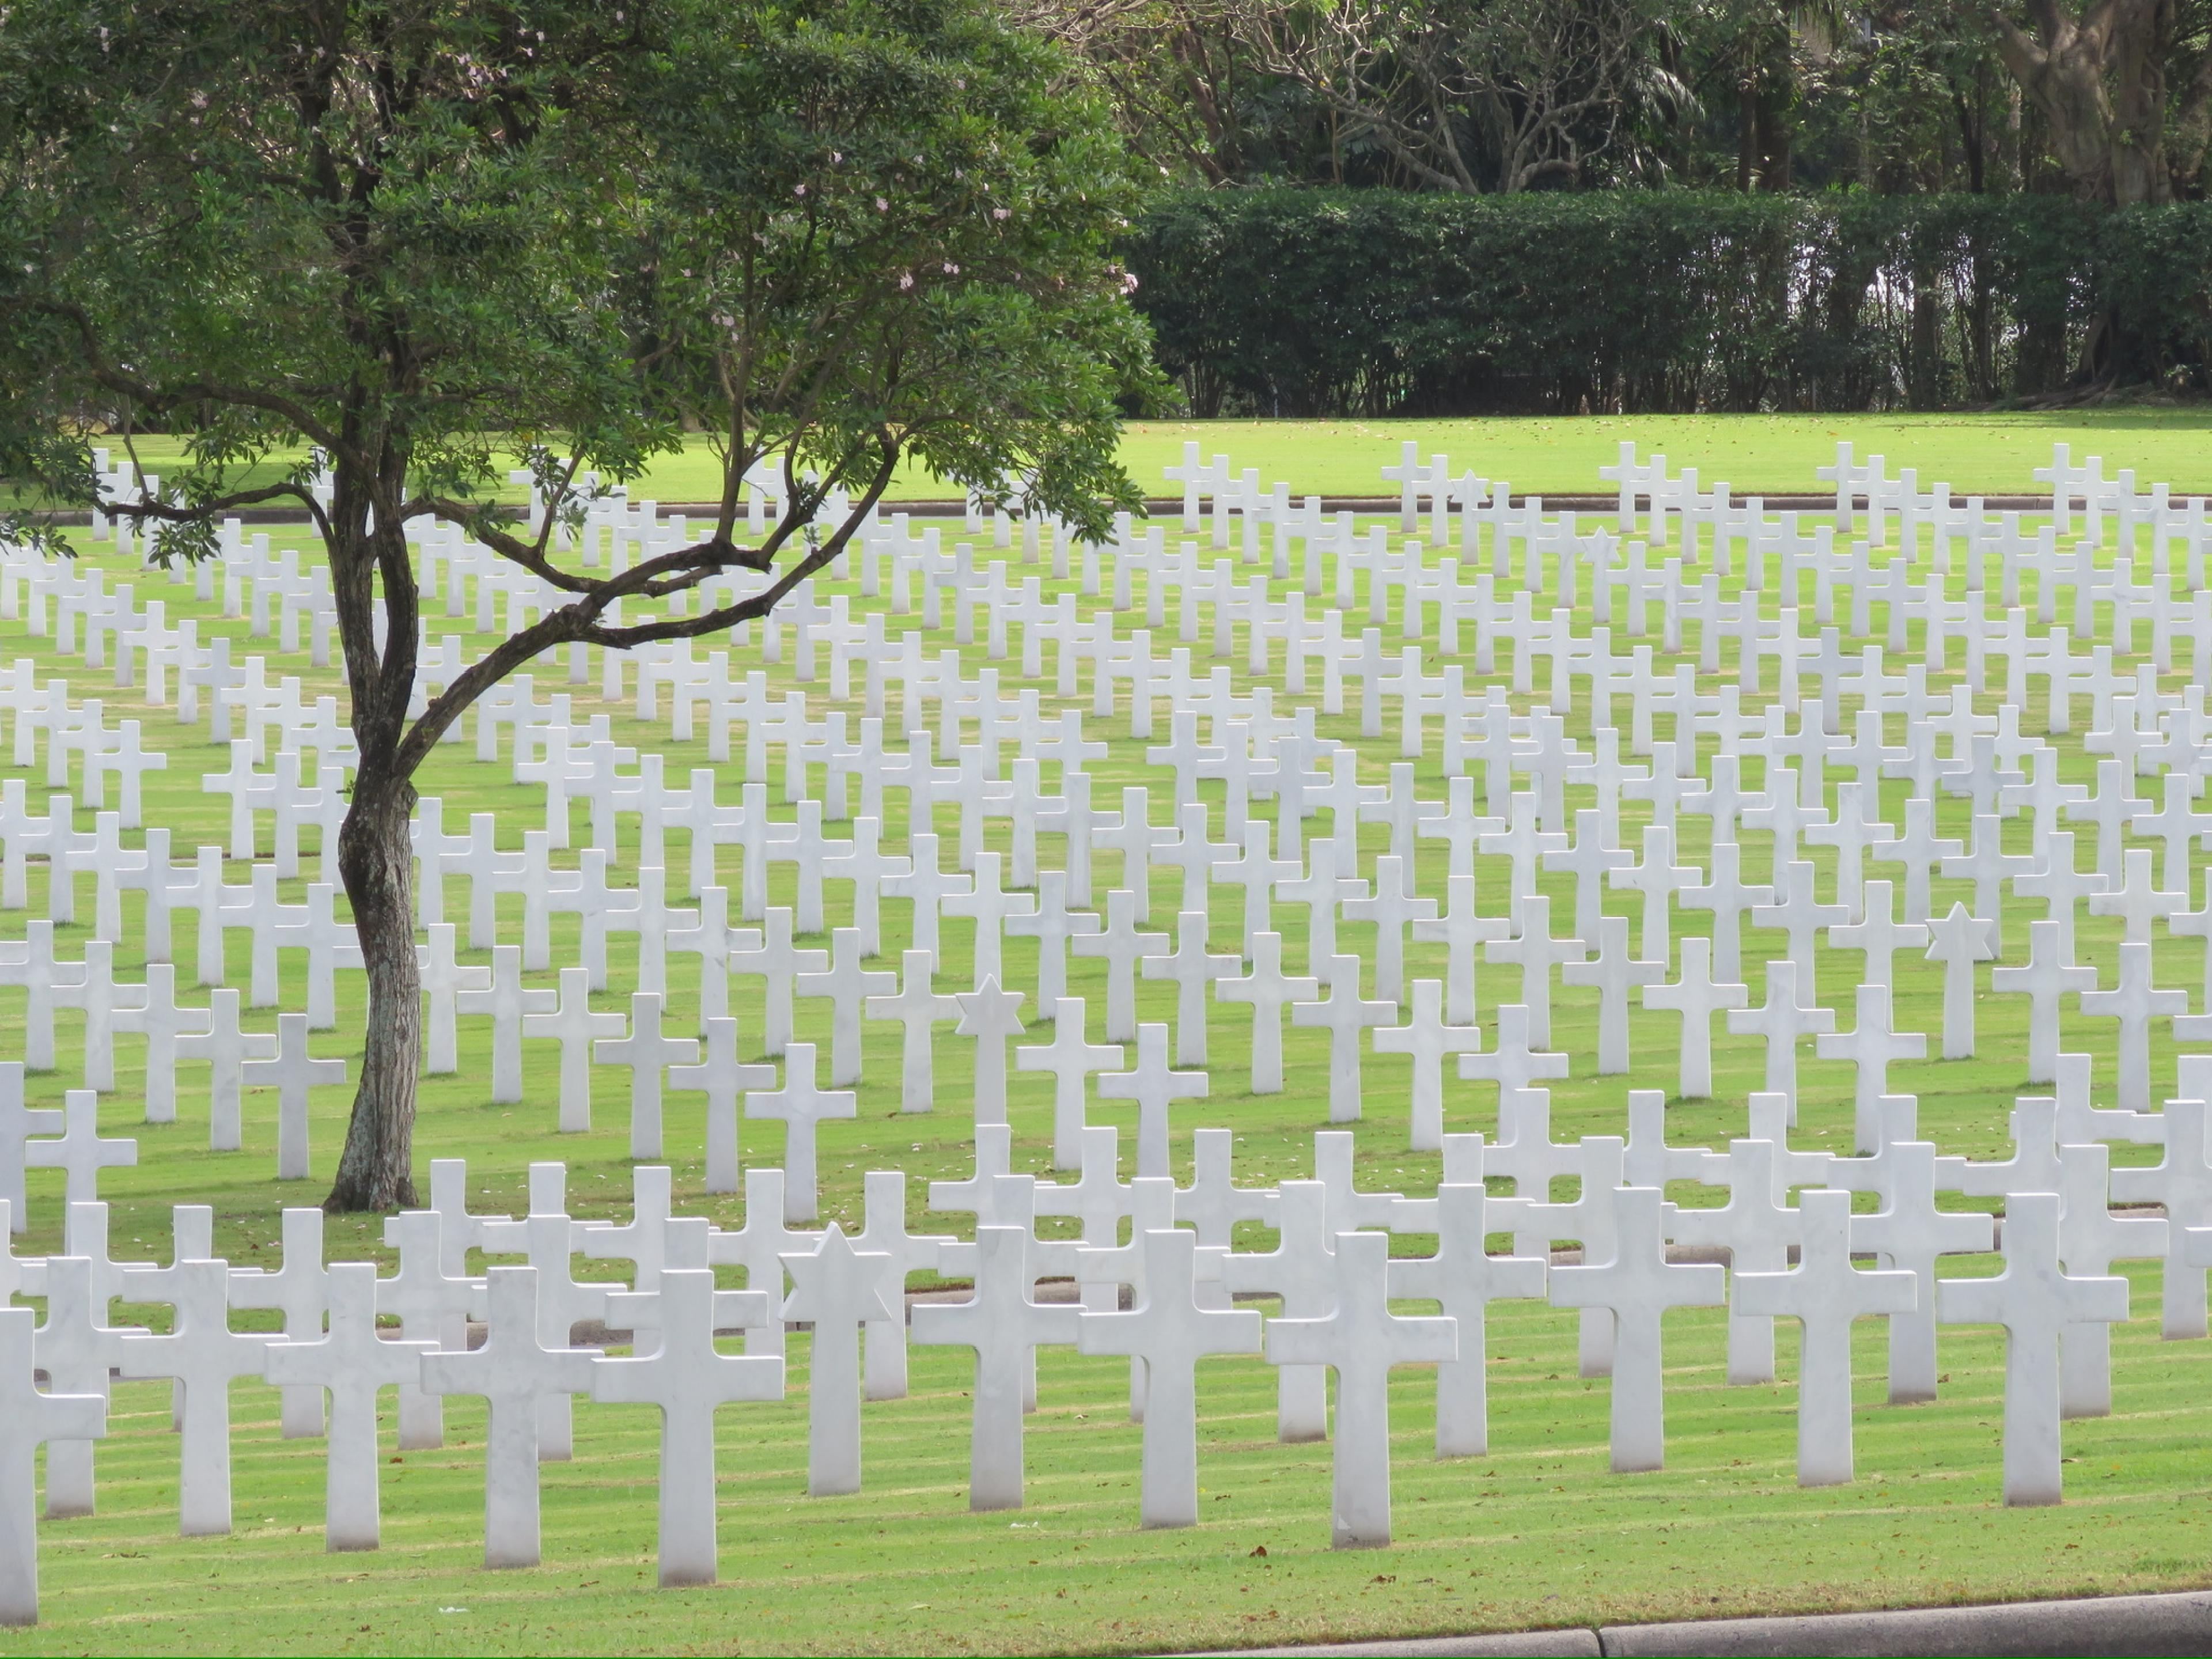 view of a military cemetery with hundreds of simple white crosses